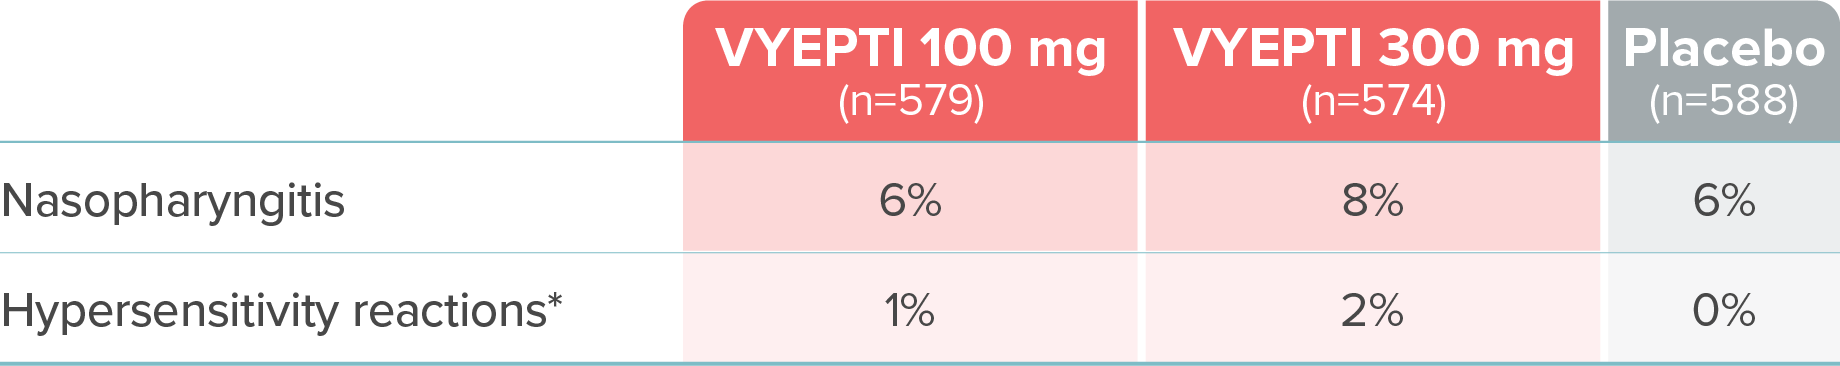 Nasopharyngitis rates were 6% for VYEPTI 100 mg, 8% for VYEPTI 300 mg, and 6% for placebo. Hypersensitivity reaction rates were 1% for VYEPTI 100 mg, 2% for VYEPTI 300 mg, and 0% for placebo.